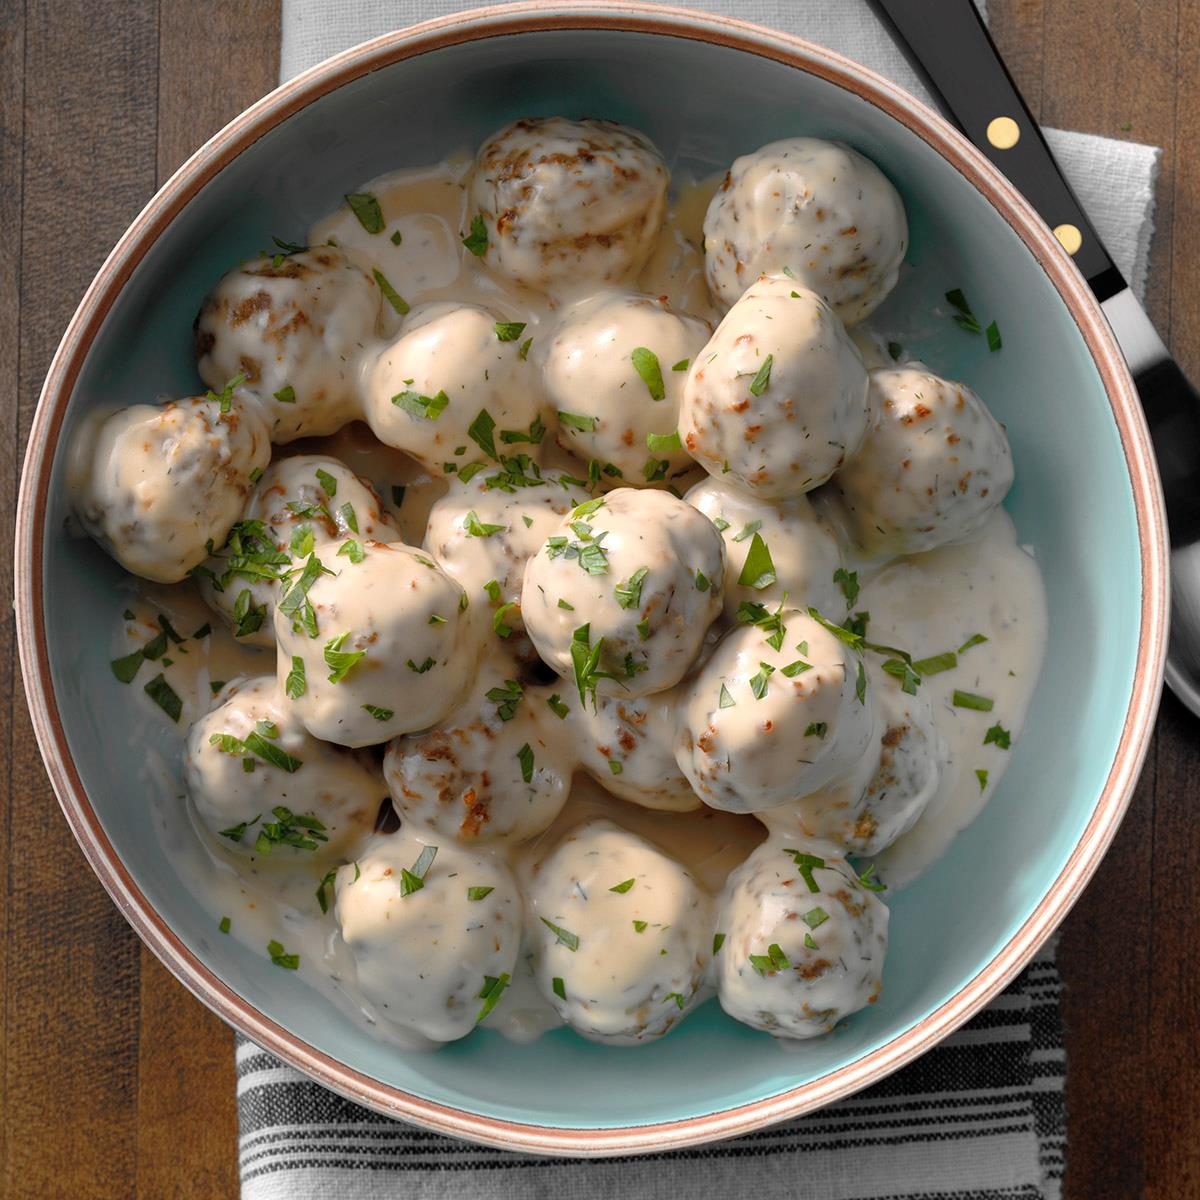 https://www.tasteofhome.com/wp-content/uploads/2018/07/Quick-and-Easy-Swedish-Meatballs_EXPS_THSO18_228834_D04_20_3b.jpg